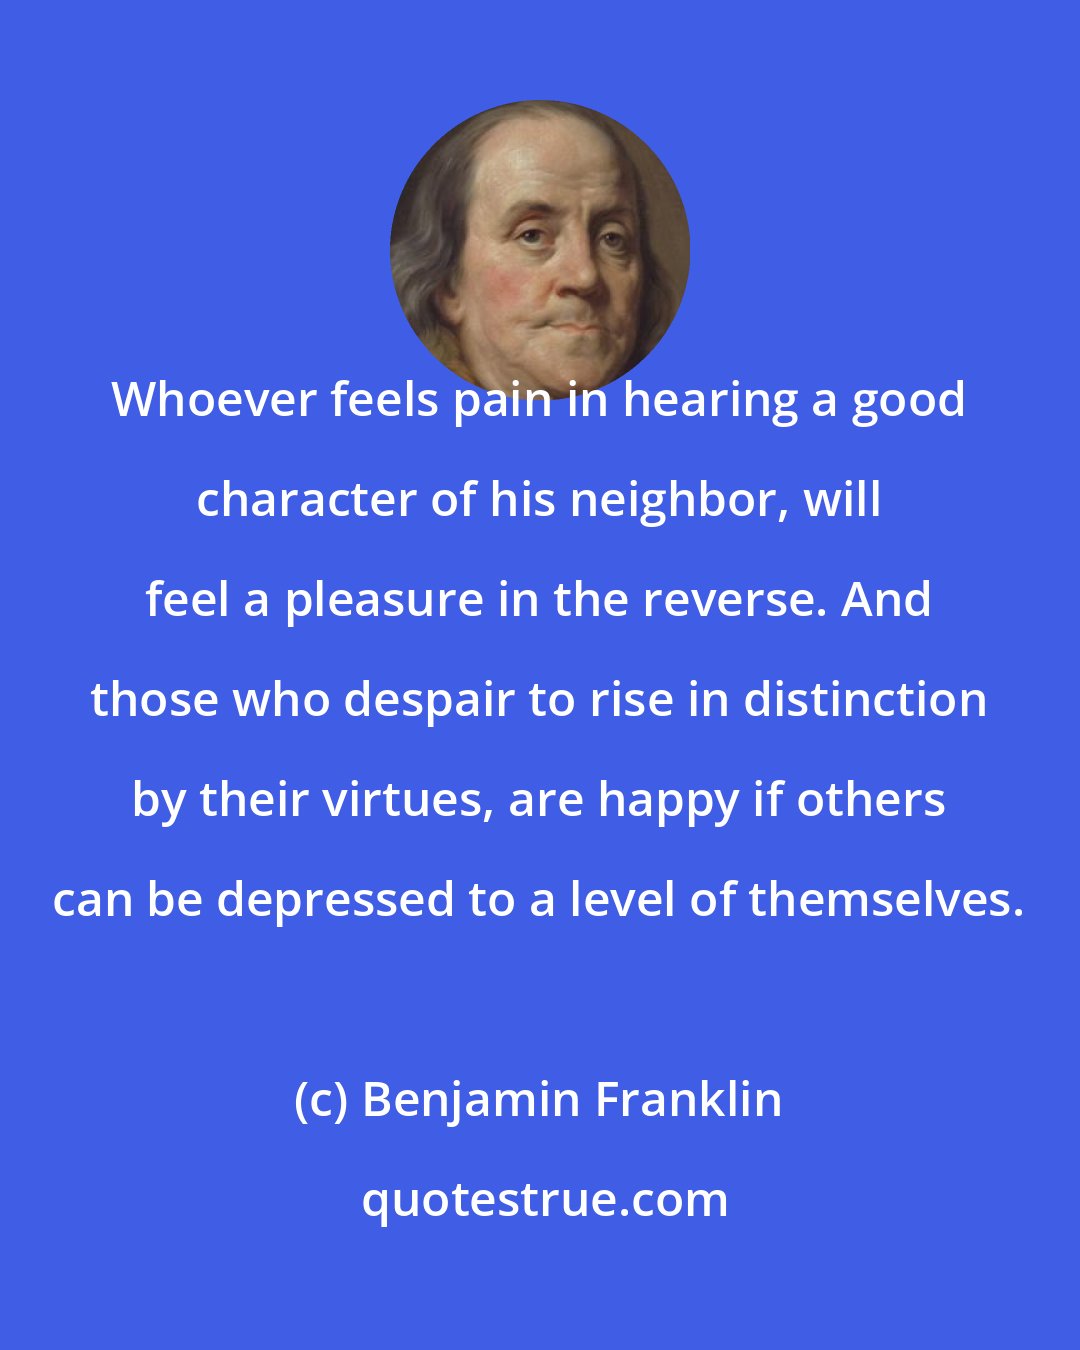 Benjamin Franklin: Whoever feels pain in hearing a good character of his neighbor, will feel a pleasure in the reverse. And those who despair to rise in distinction by their virtues, are happy if others can be depressed to a level of themselves.